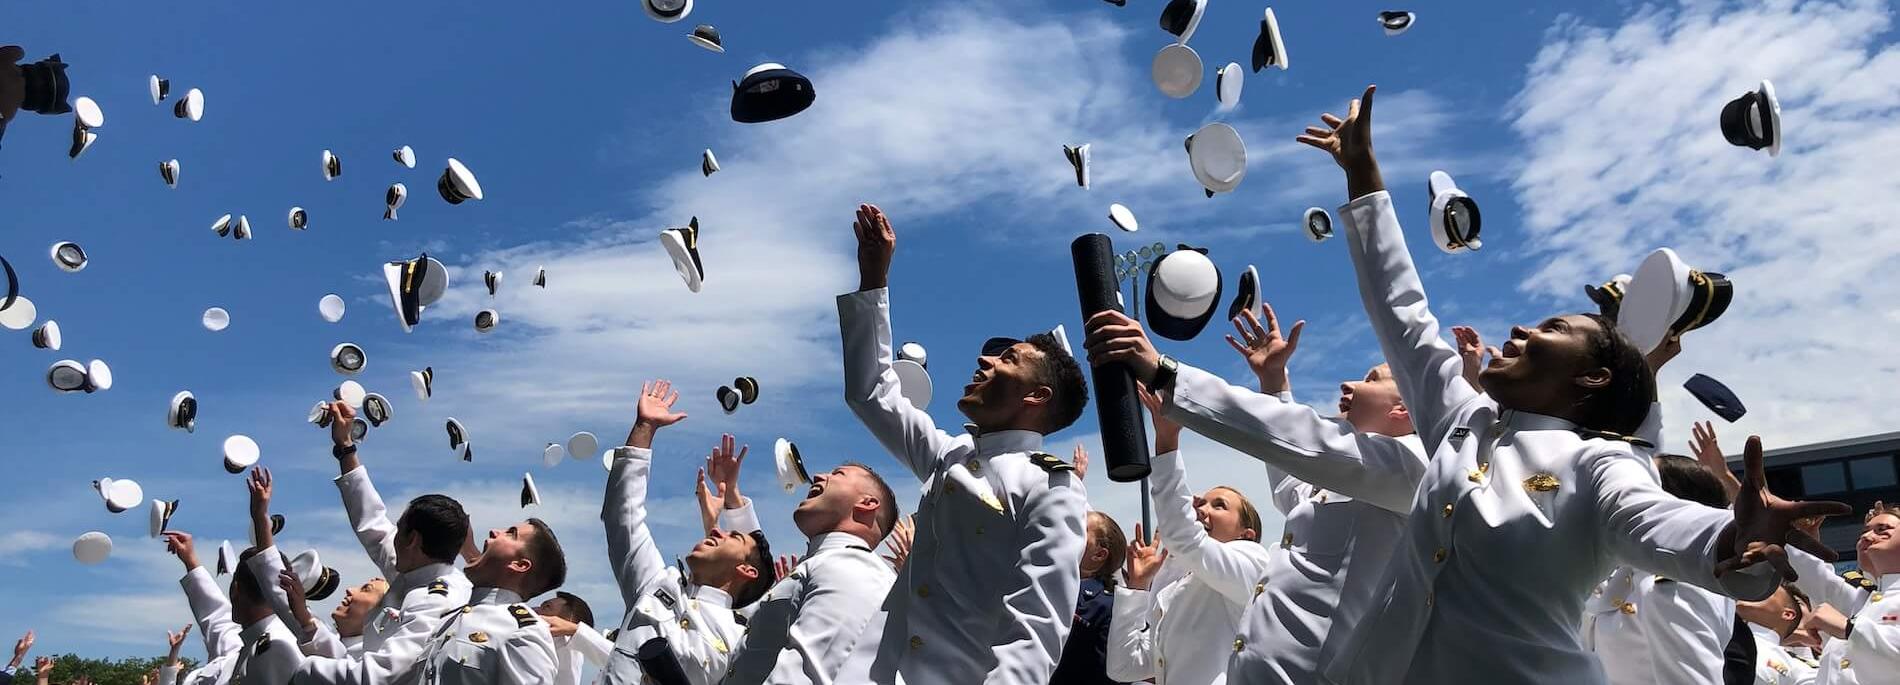 Cadets tossing hats